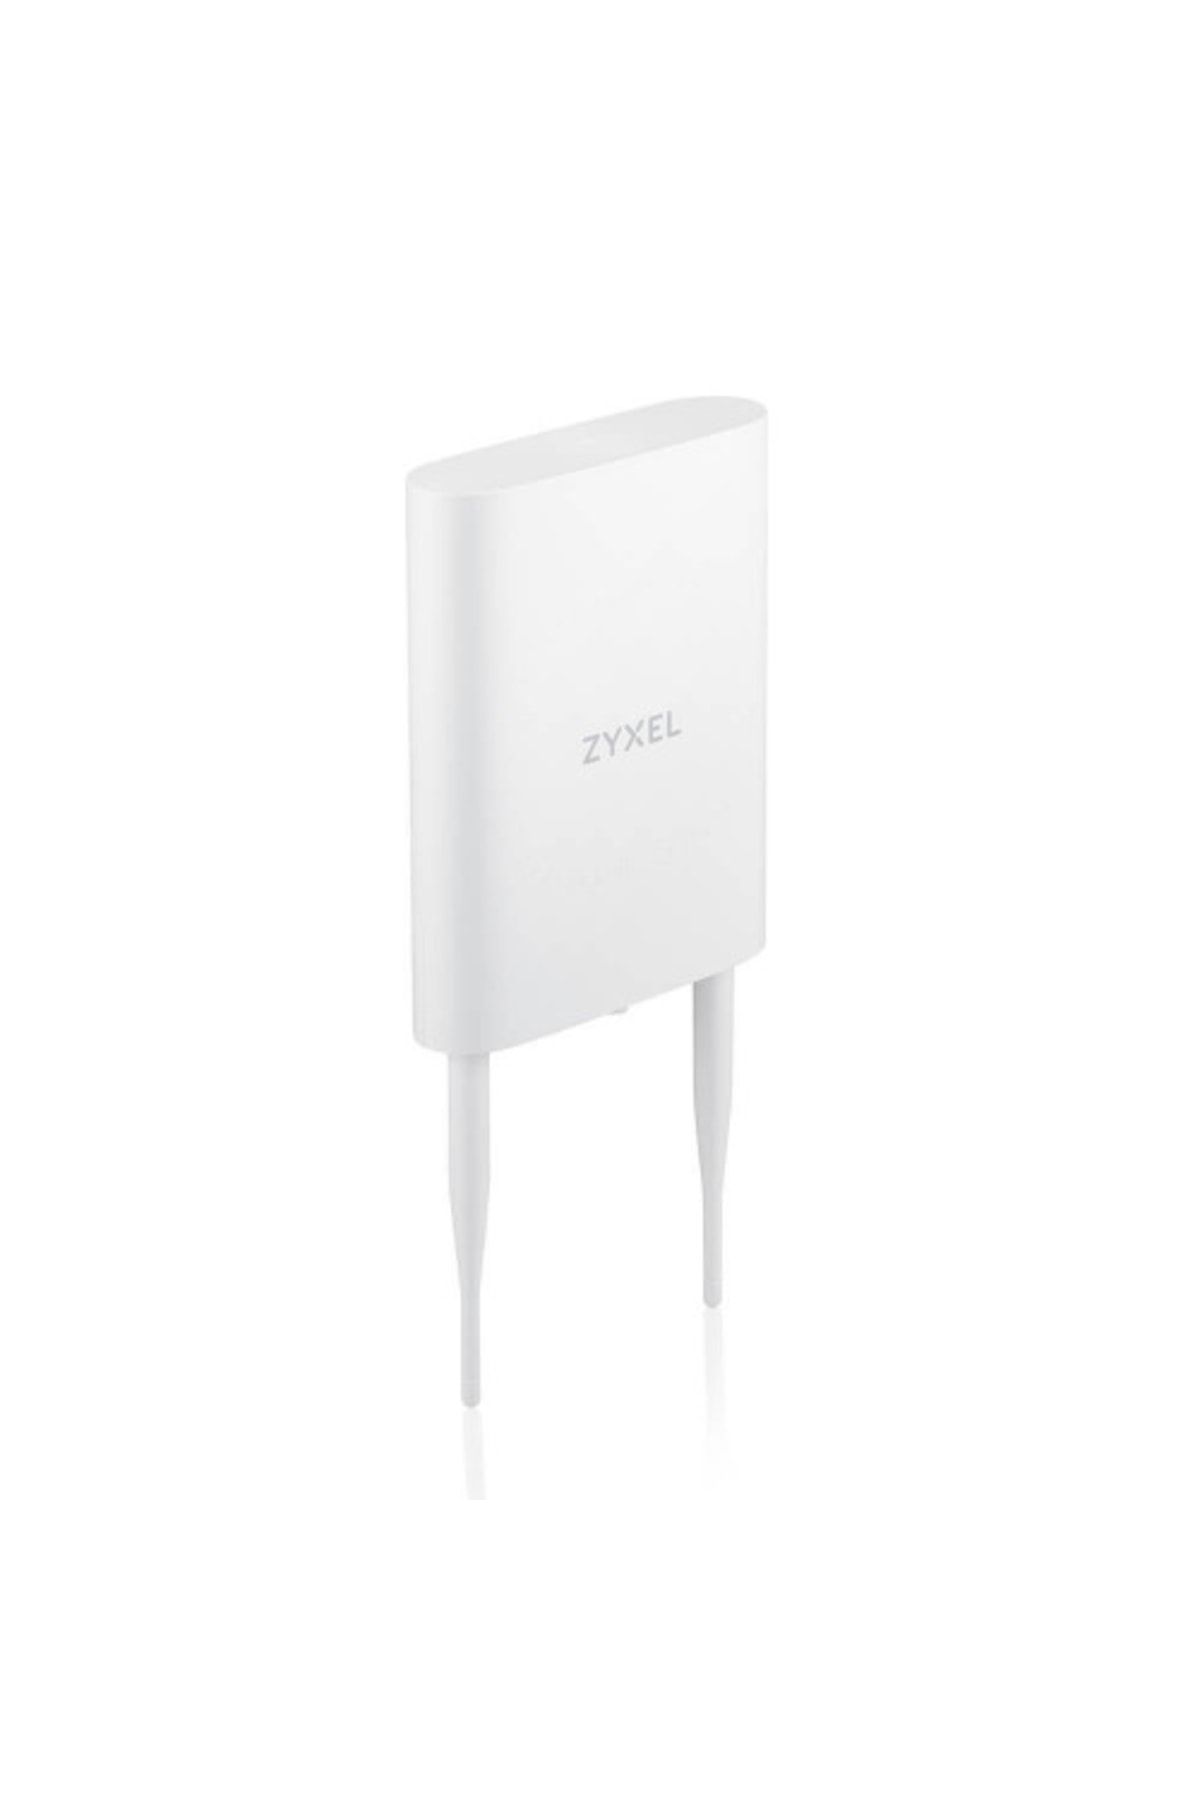 Zyxel Nwa55axe, 1port, 1200mbps, Dual Band, Wifi 6, Duvar Tipi, Poe, Outdoor, Access Point